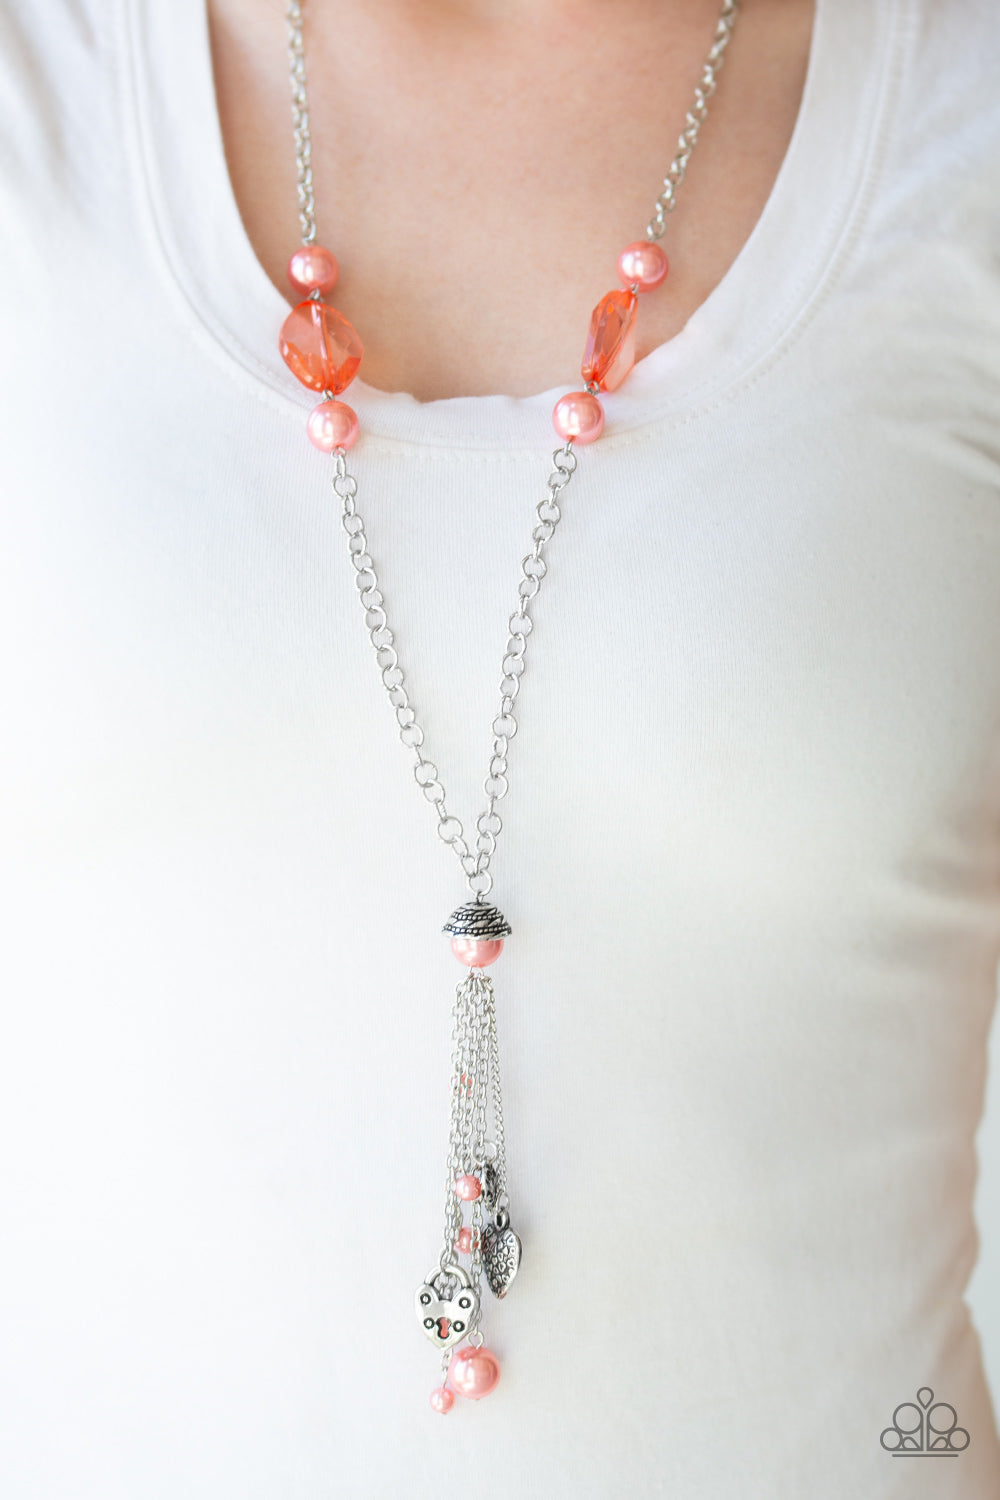 Paparazzi Heart-Stopping Harmony - Orange / Coral - Necklace & Earrings - $5 Jewelry With Ashley Swint